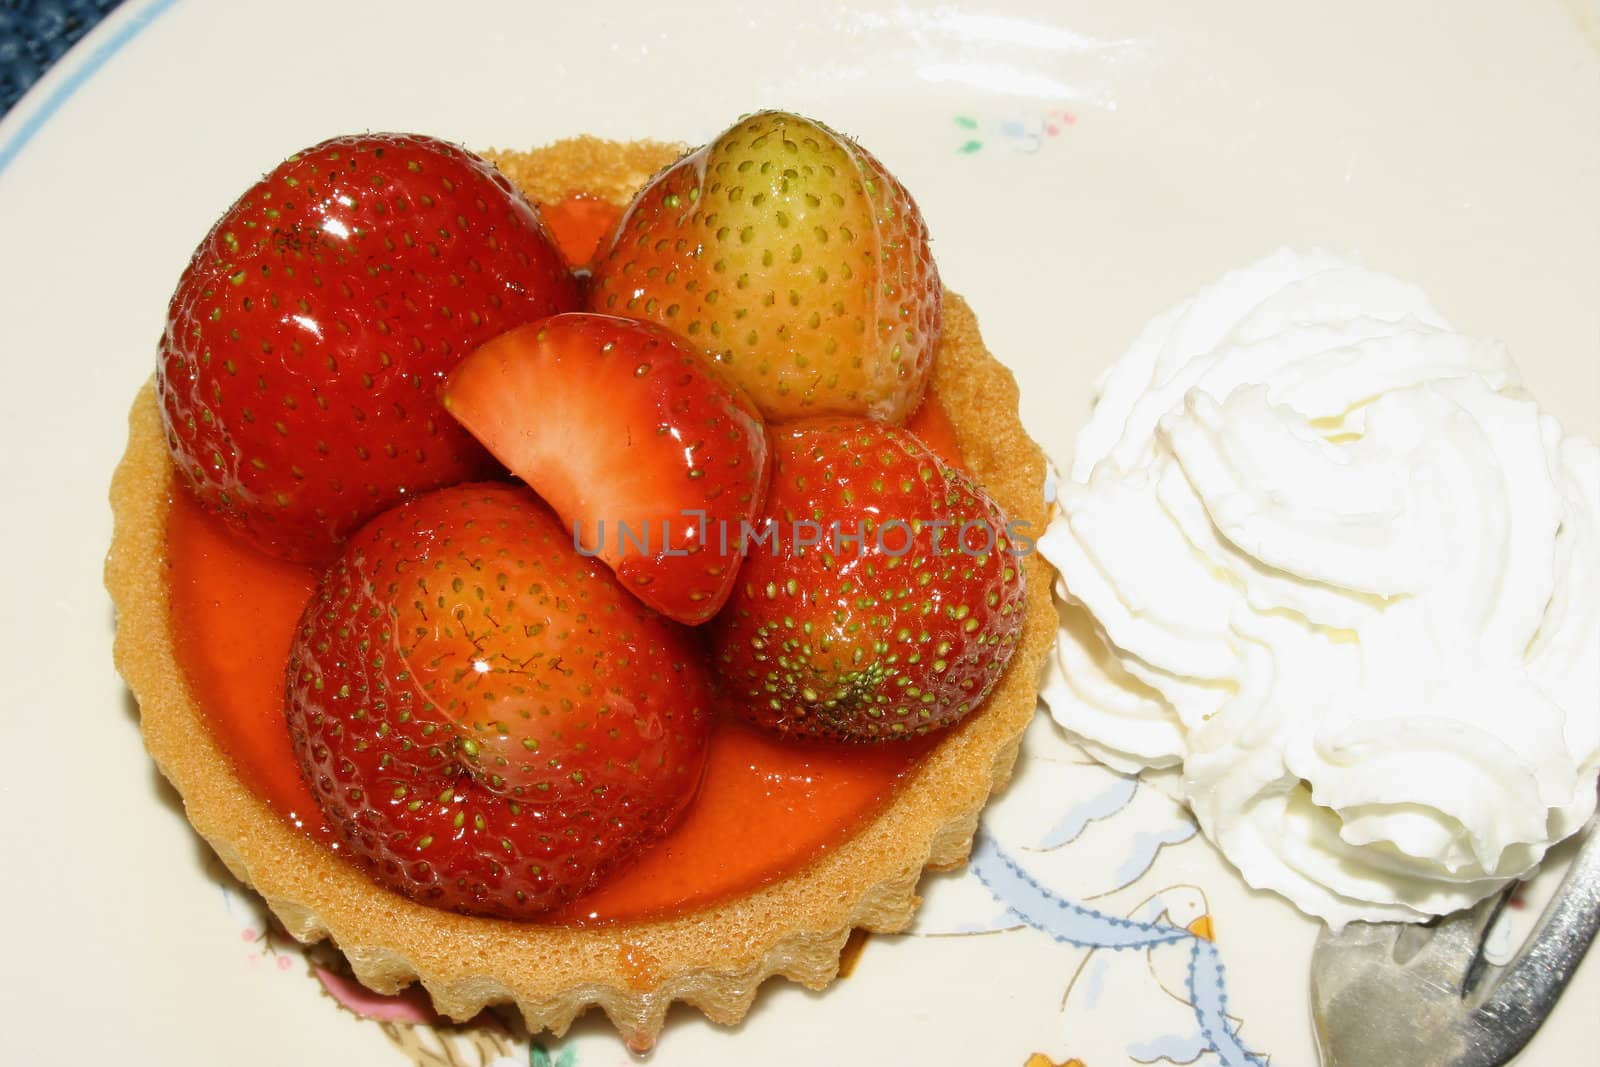 Strawberry tart with whipped cream